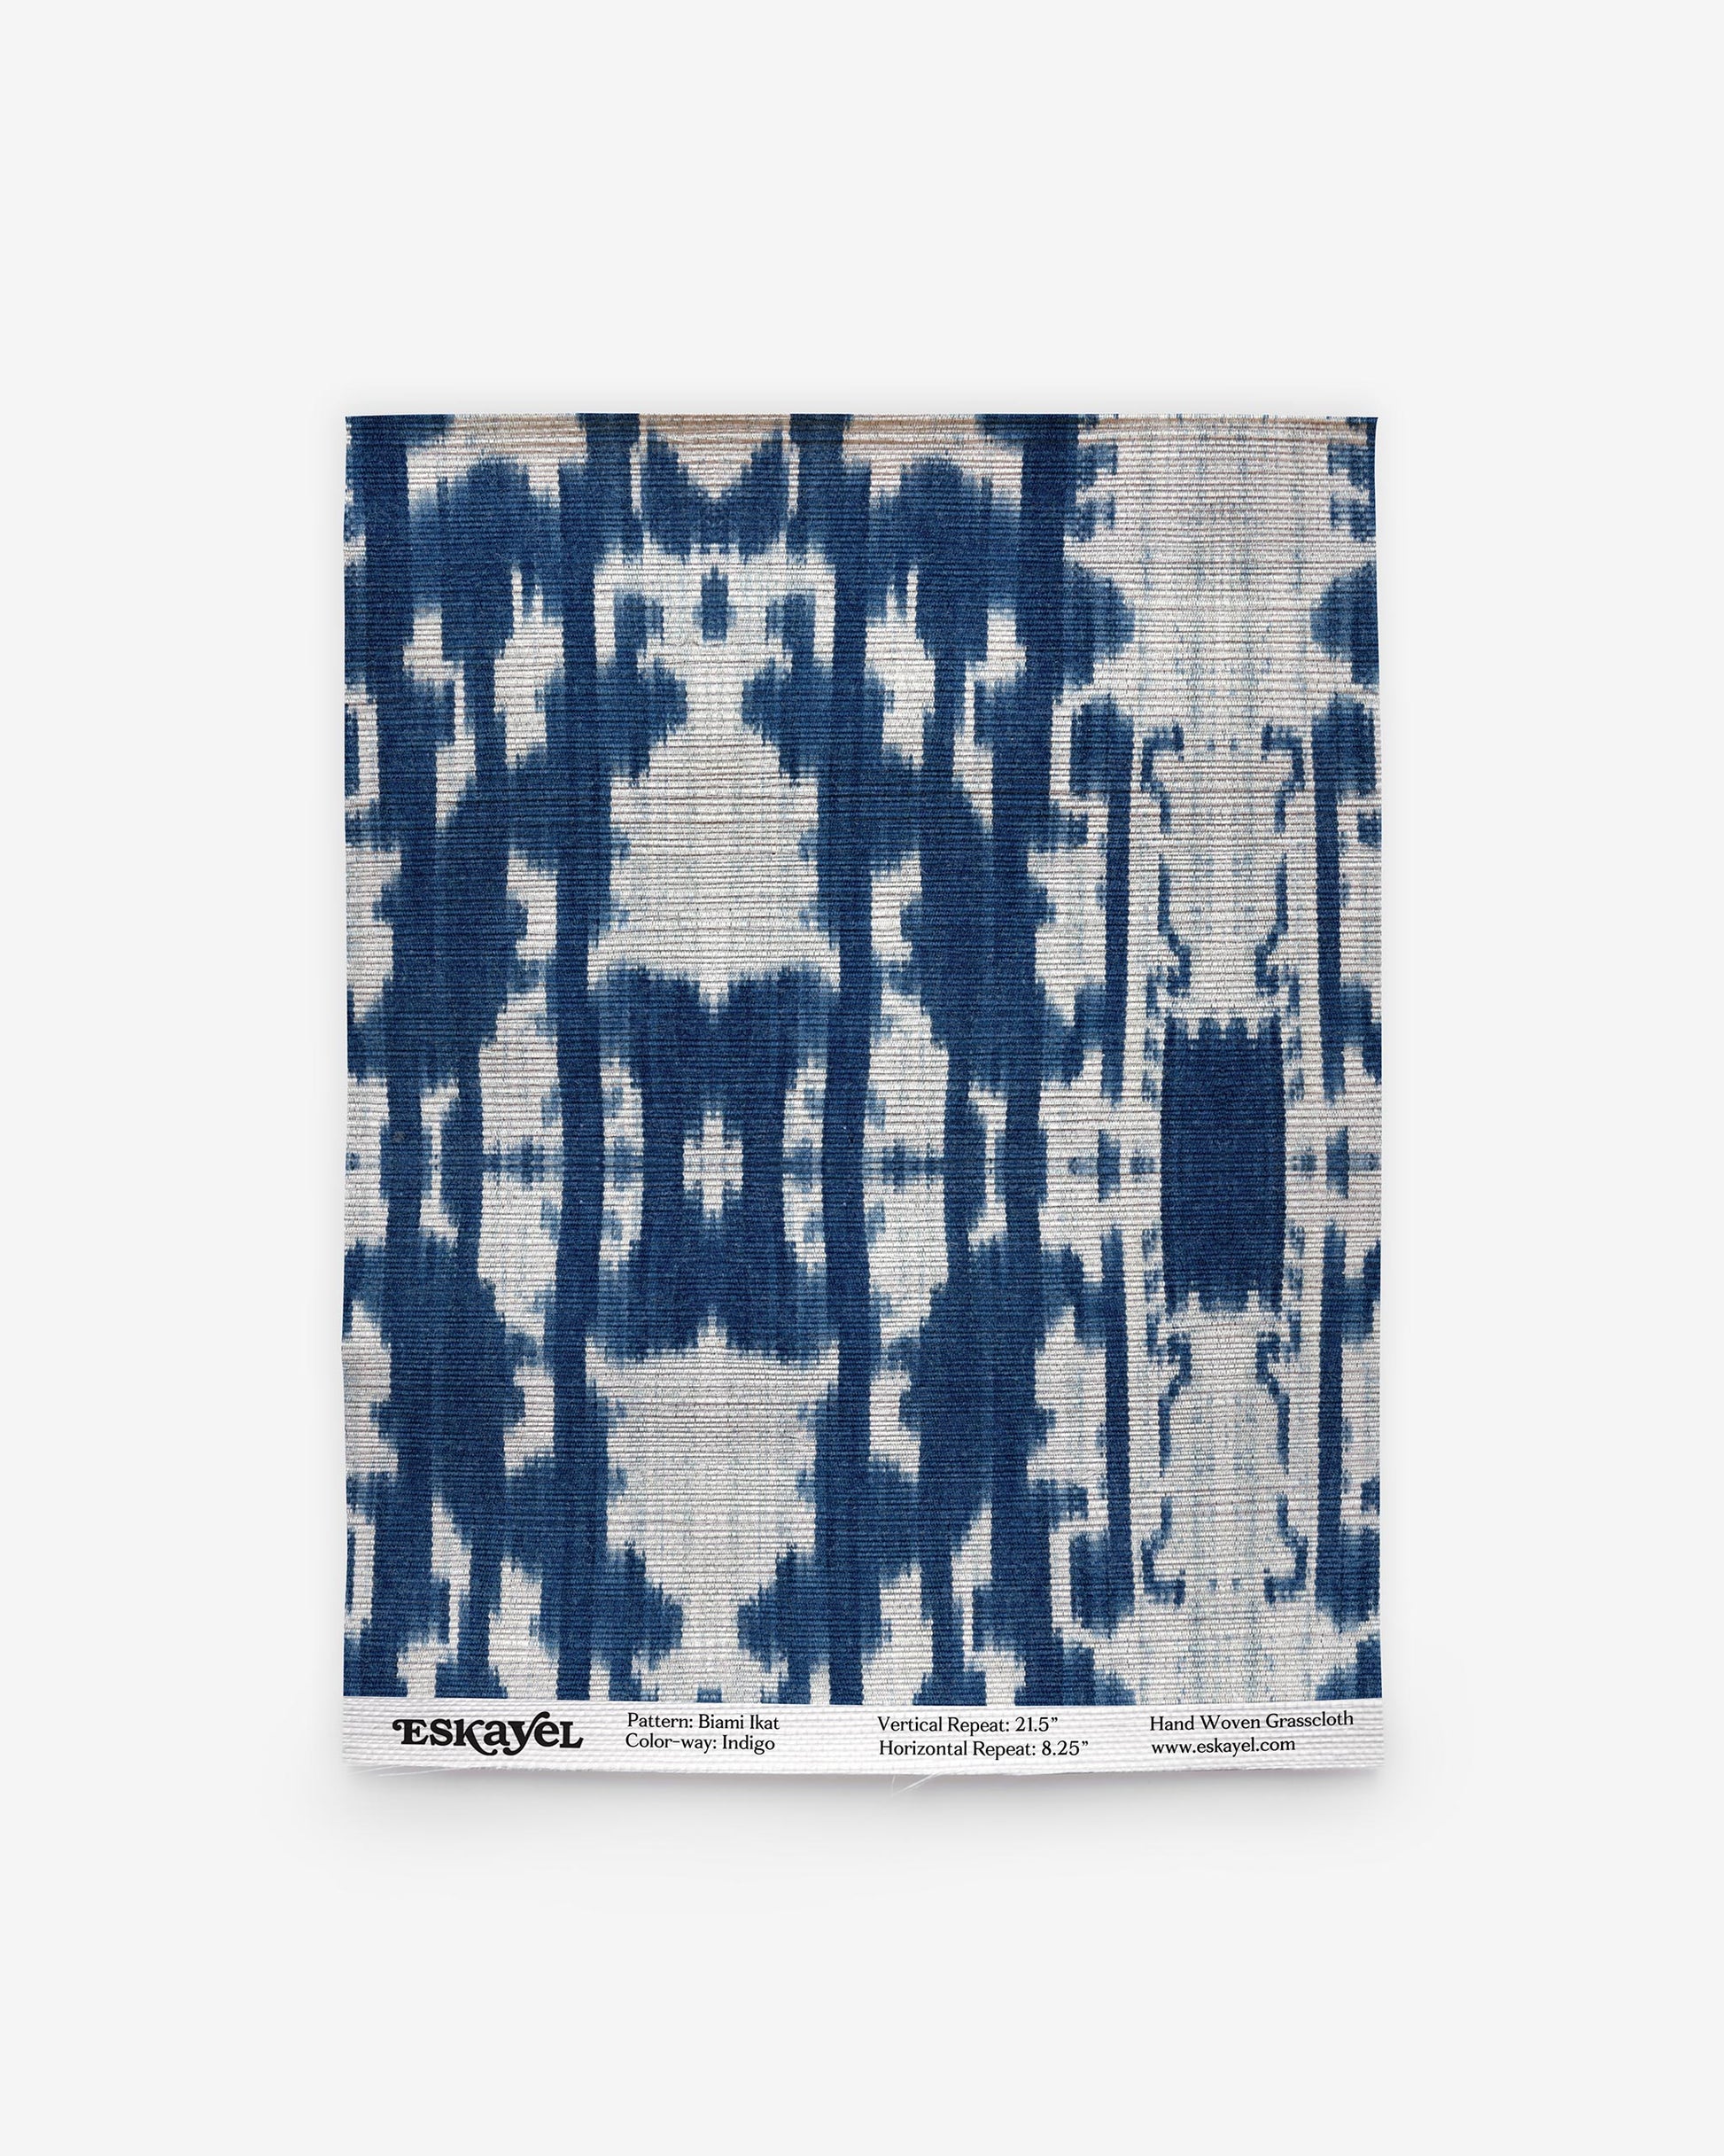 A blue and white Biami Grasscloth Sample||Indigo ikat pattern on a white background is available for order.